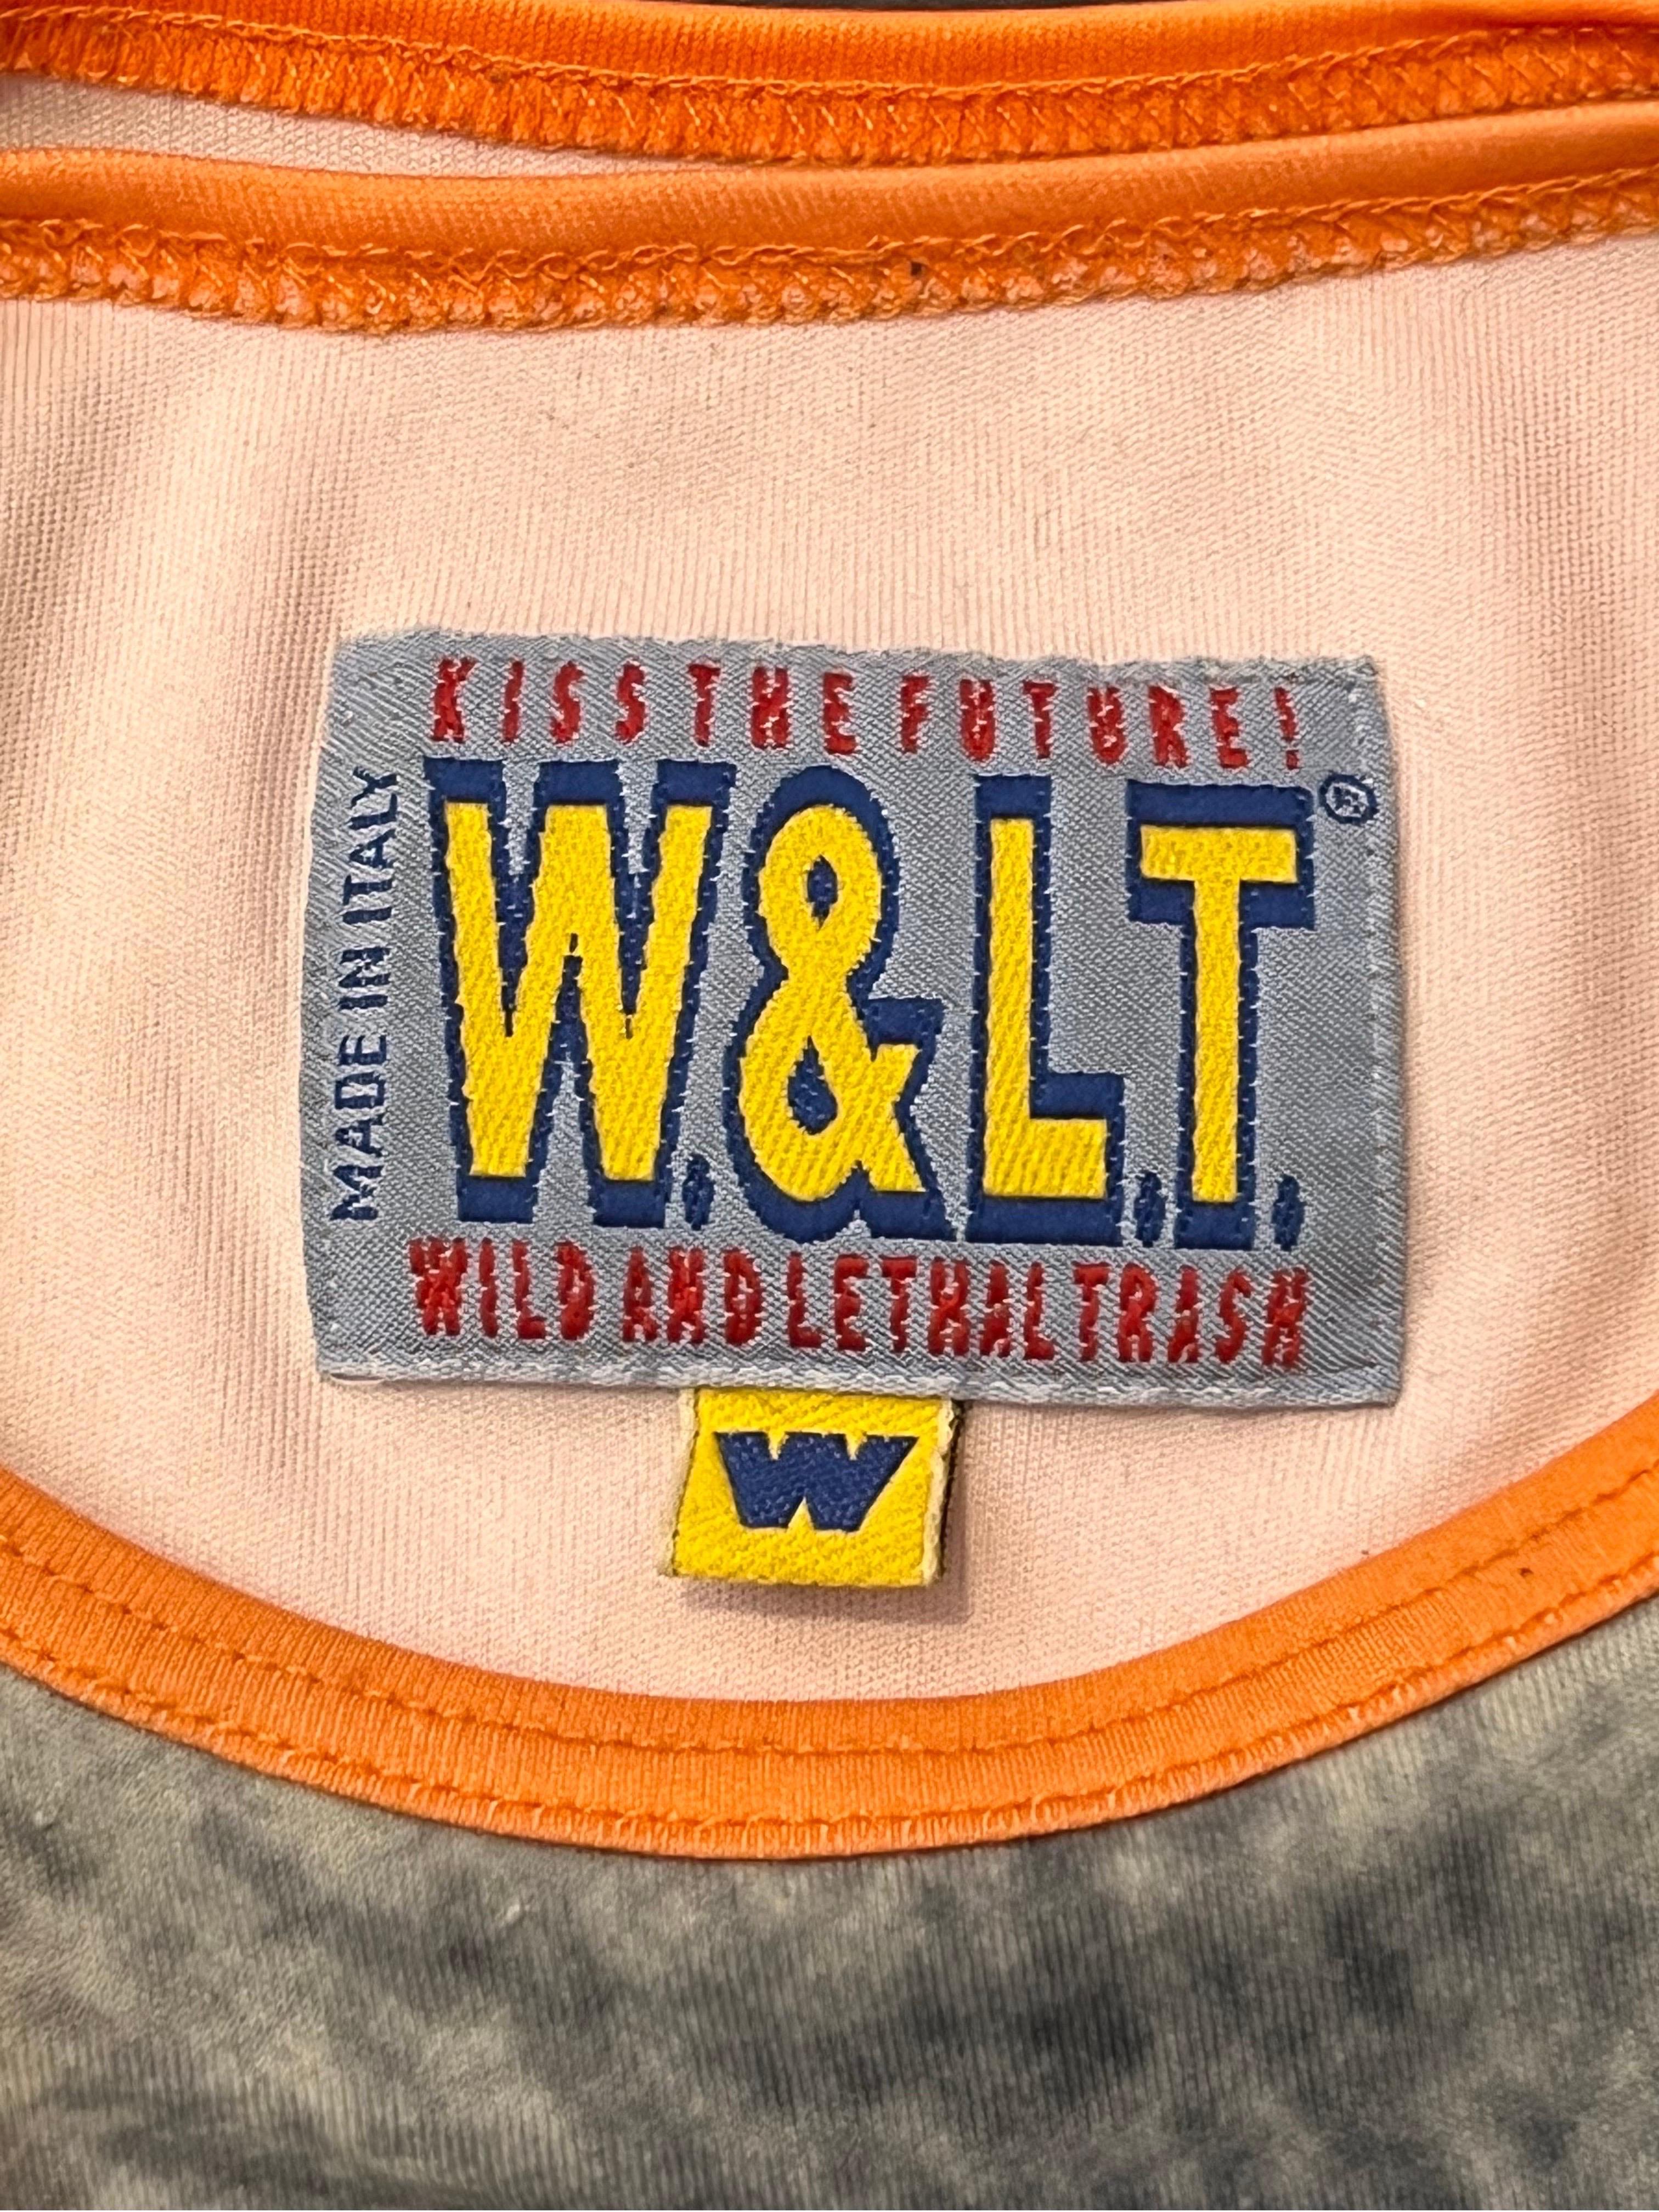 Iconic W< (Wild & Lethal Trash) PUK PUK tops by Walter Van Beirendonck  In Good Condition For Sale In COLLINGWOOD, AU